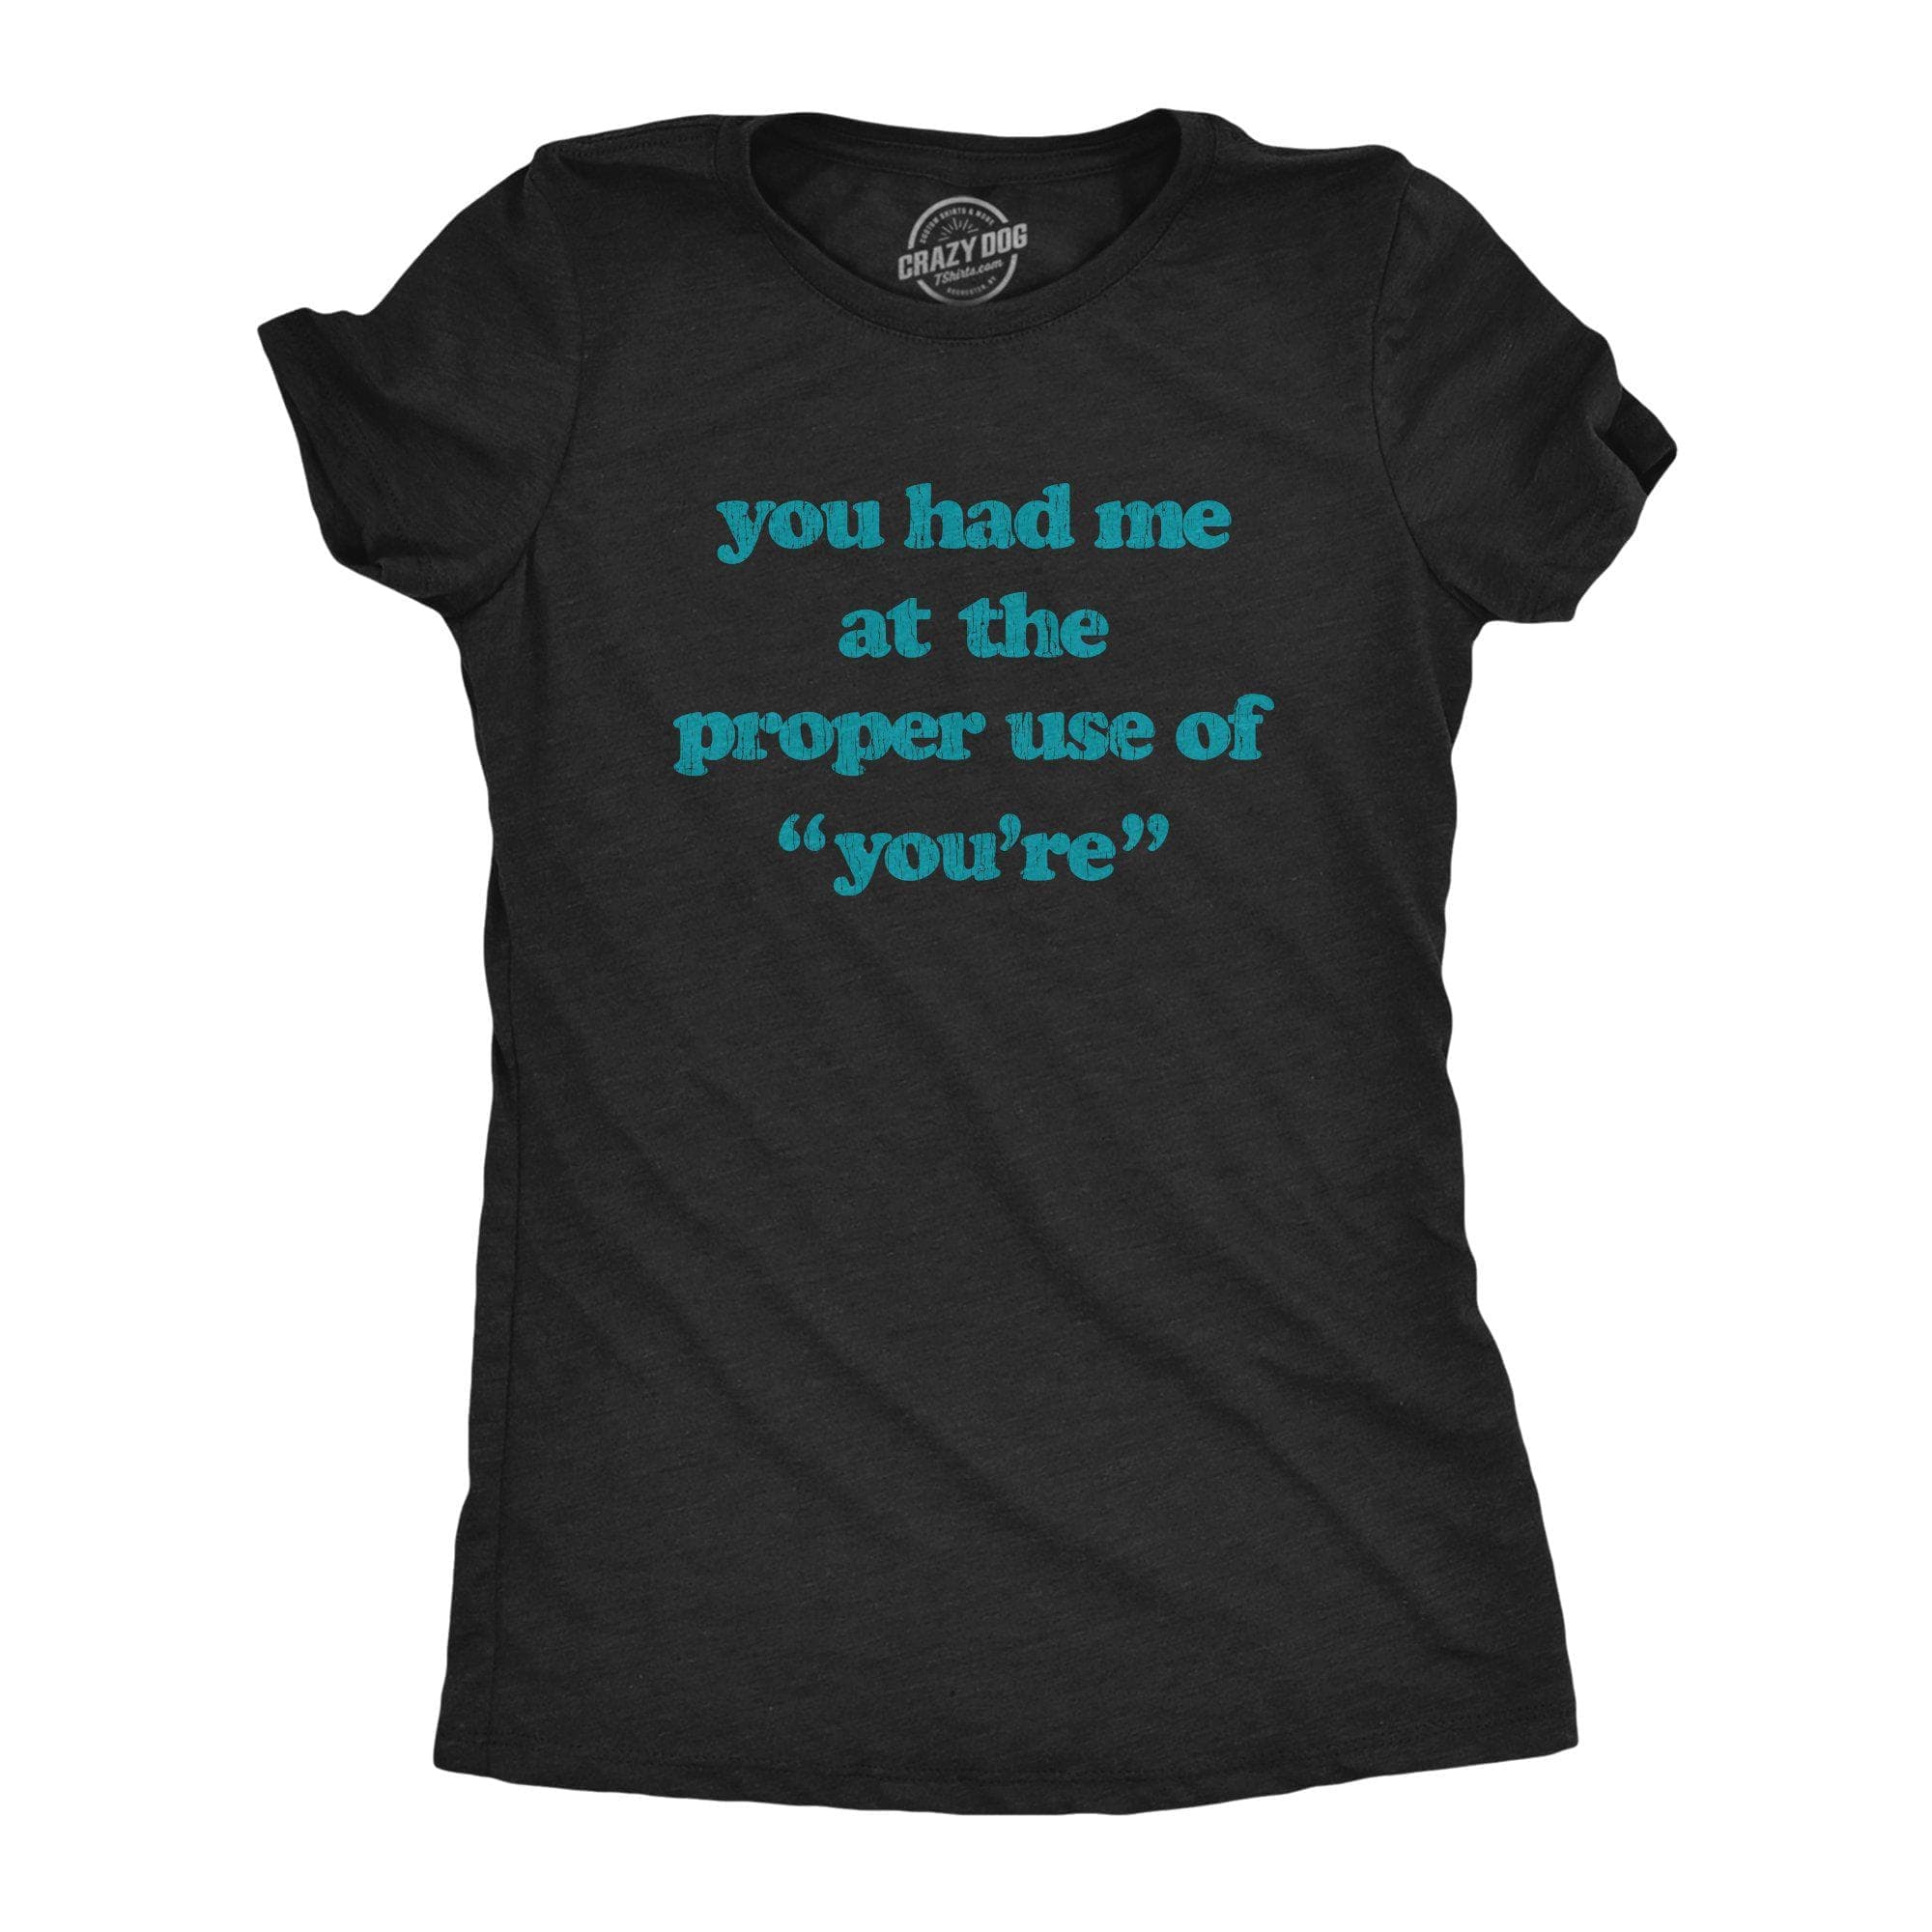 You Had Me At The Proper Use Of You're Women's Tshirt - Crazy Dog T-Shirts